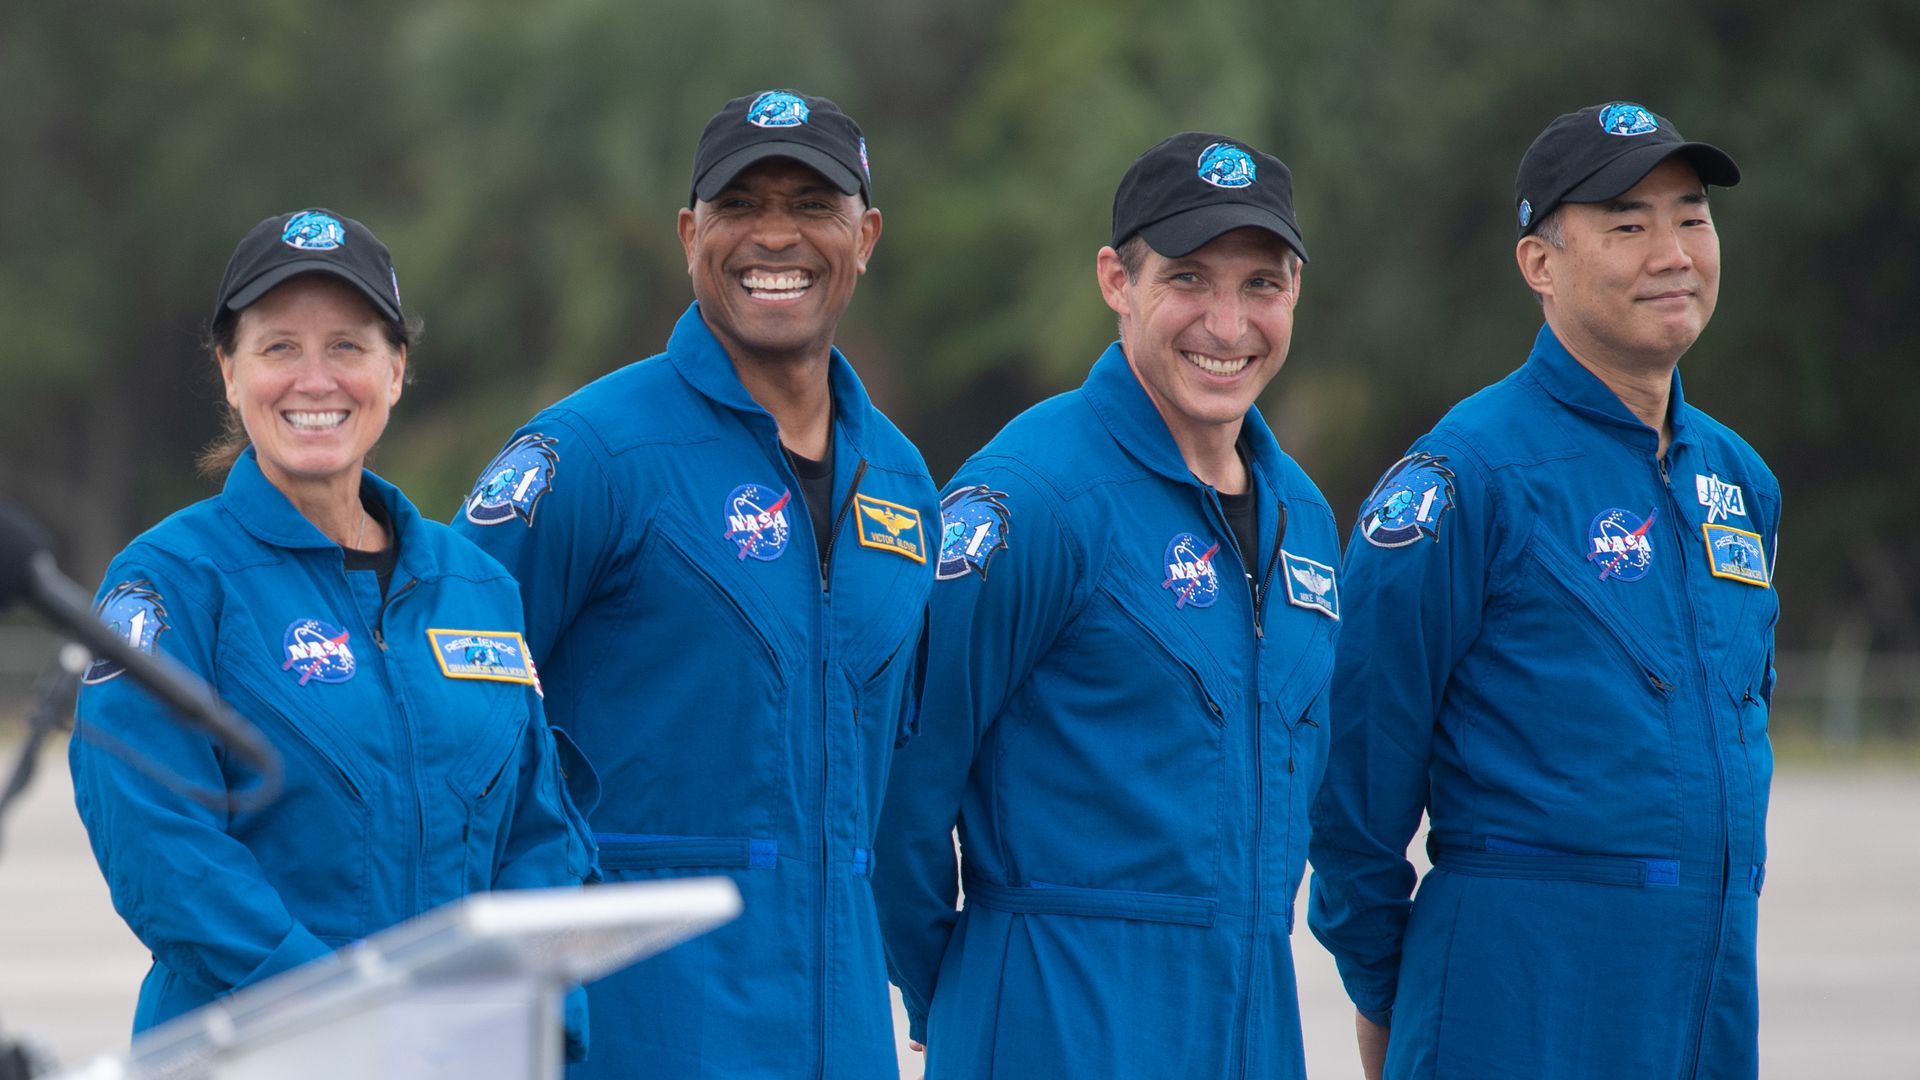 From left to right: Shannon Walker, Victor Glover, Mike Hopkins and Soichi Noguchi. Photo: NASA/Joel Kowsky